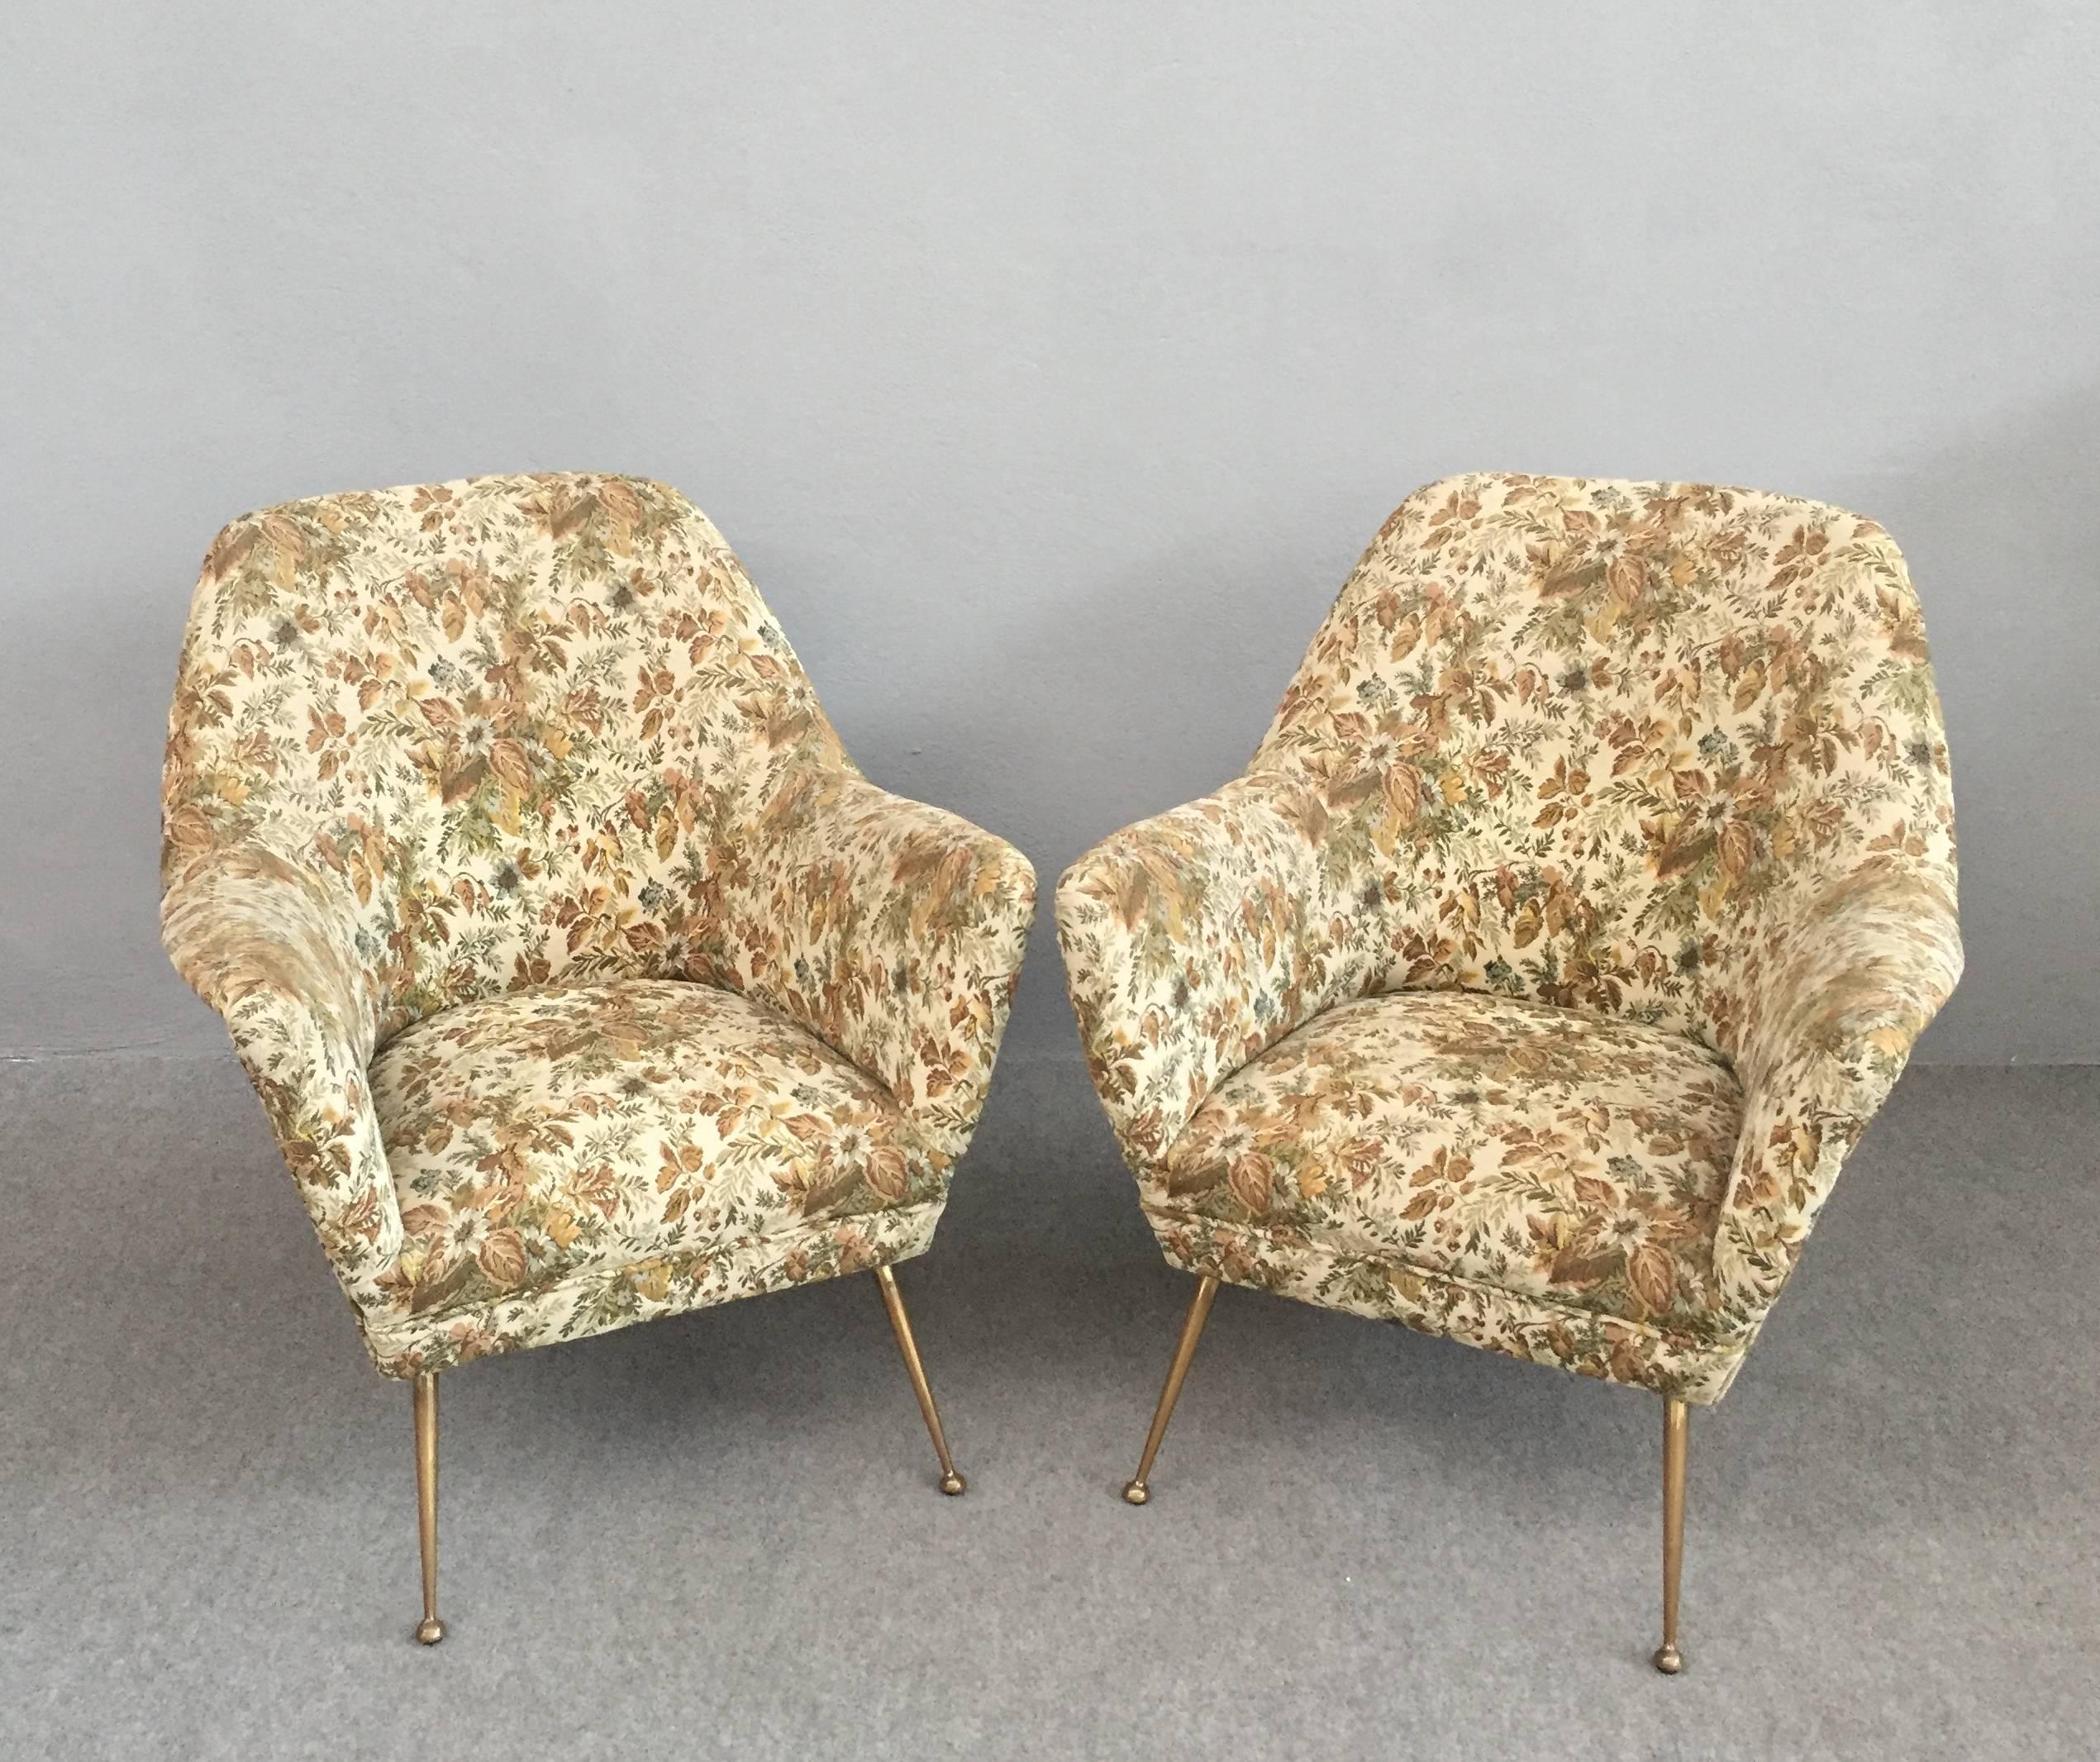 Very elegant shaped armchairs with original fabric.
Solid brass legs.